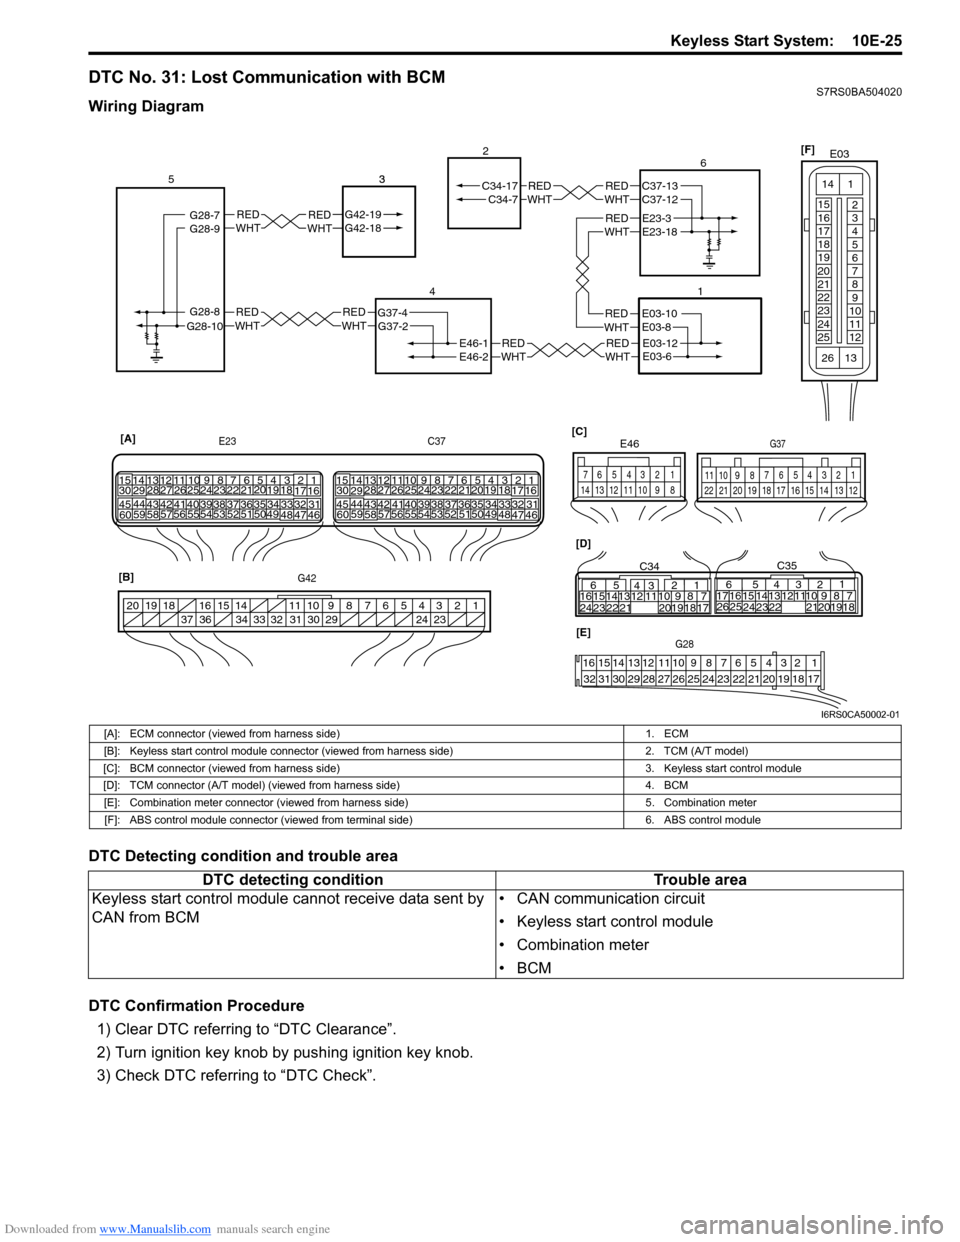 SUZUKI SWIFT 2007 2.G Service Manual PDF Downloaded from www.Manualslib.com manuals search engine Keyless Start System:  10E-25
DTC No. 31: Lost Communication with BCMS7RS0BA504020
Wiring Diagram
DTC Detecting condition and trouble area
DTC 